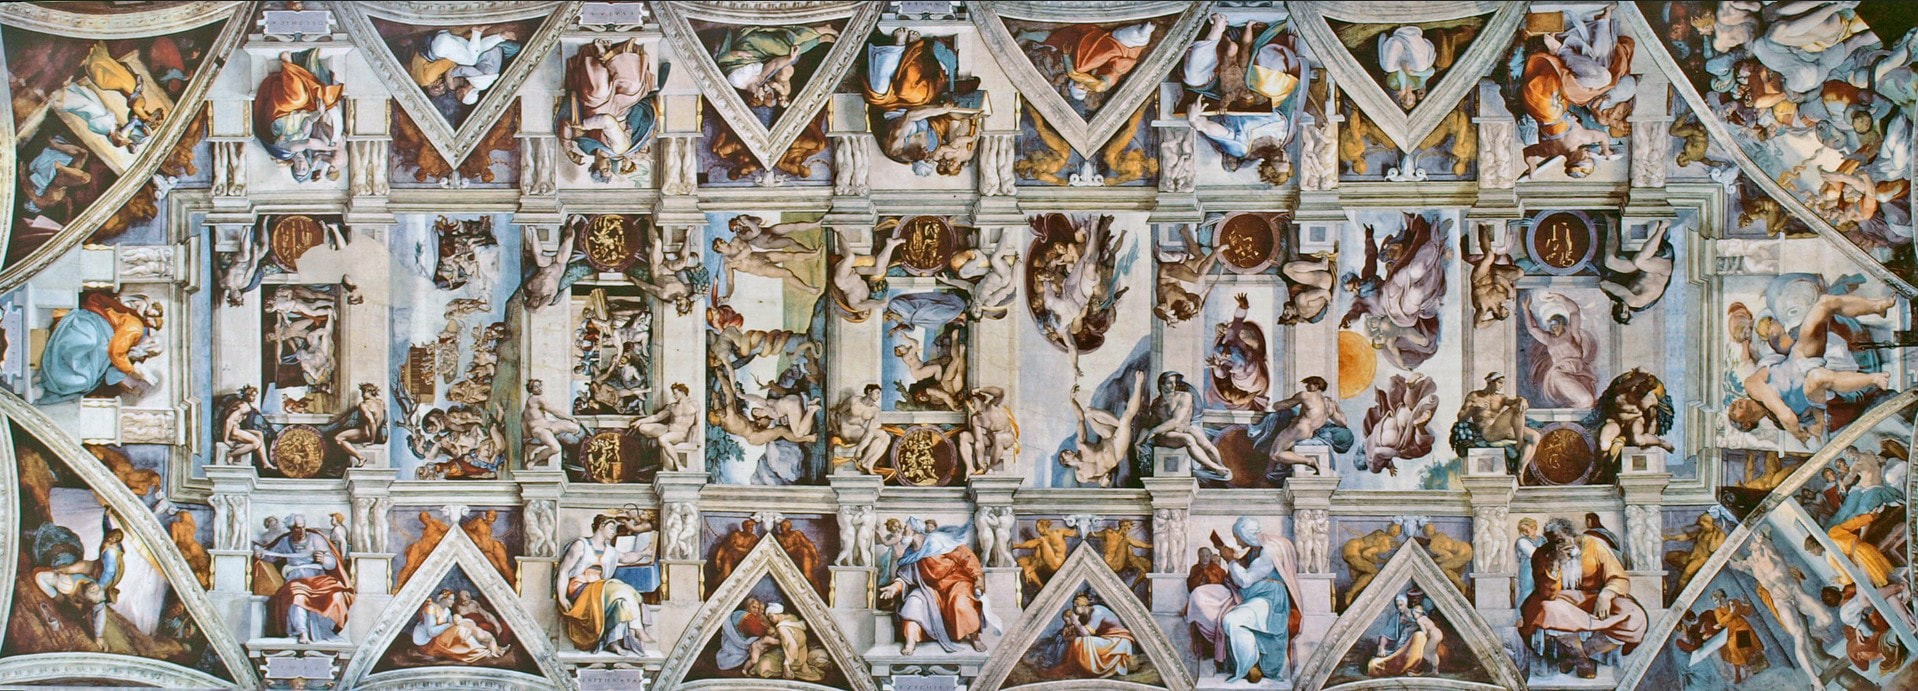 picture of sistine ceiling